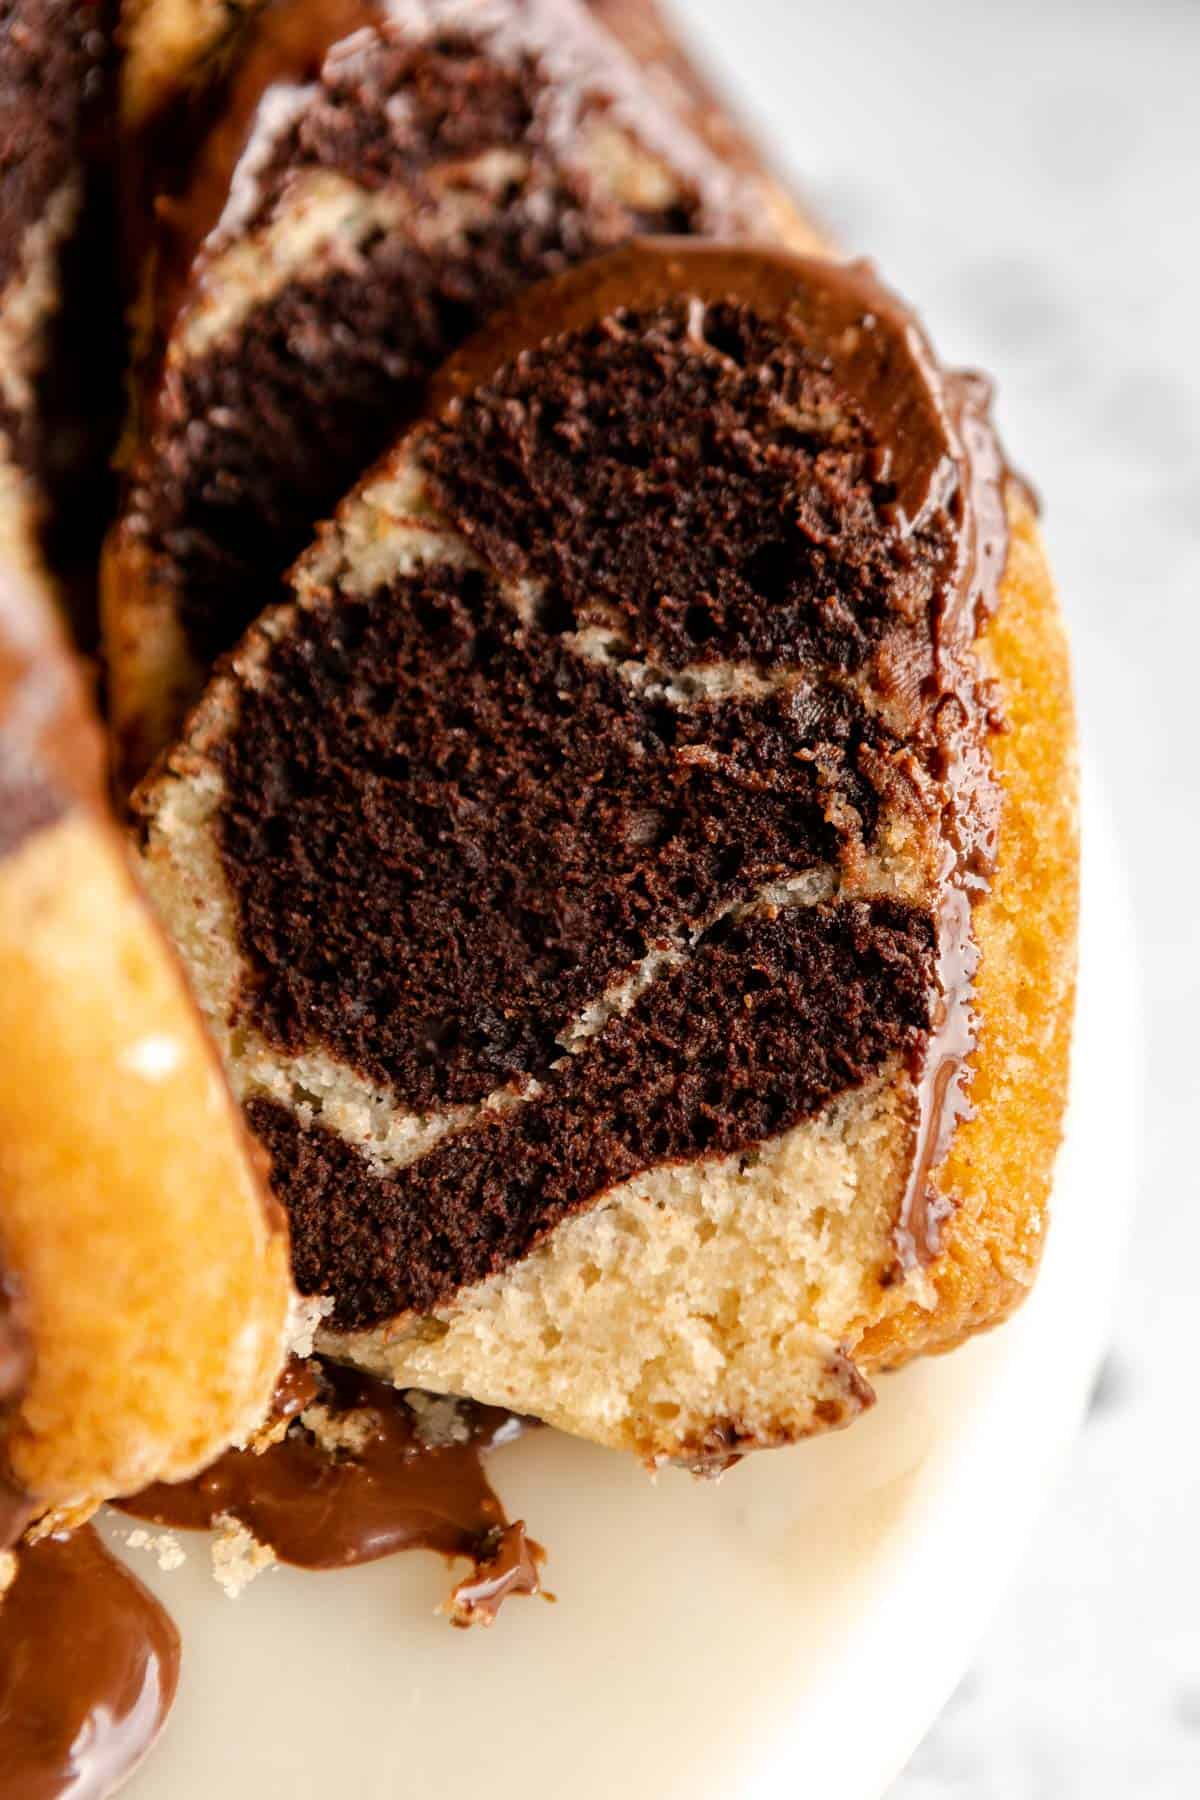 up close of the gluten free bundt cake with a slice cut out